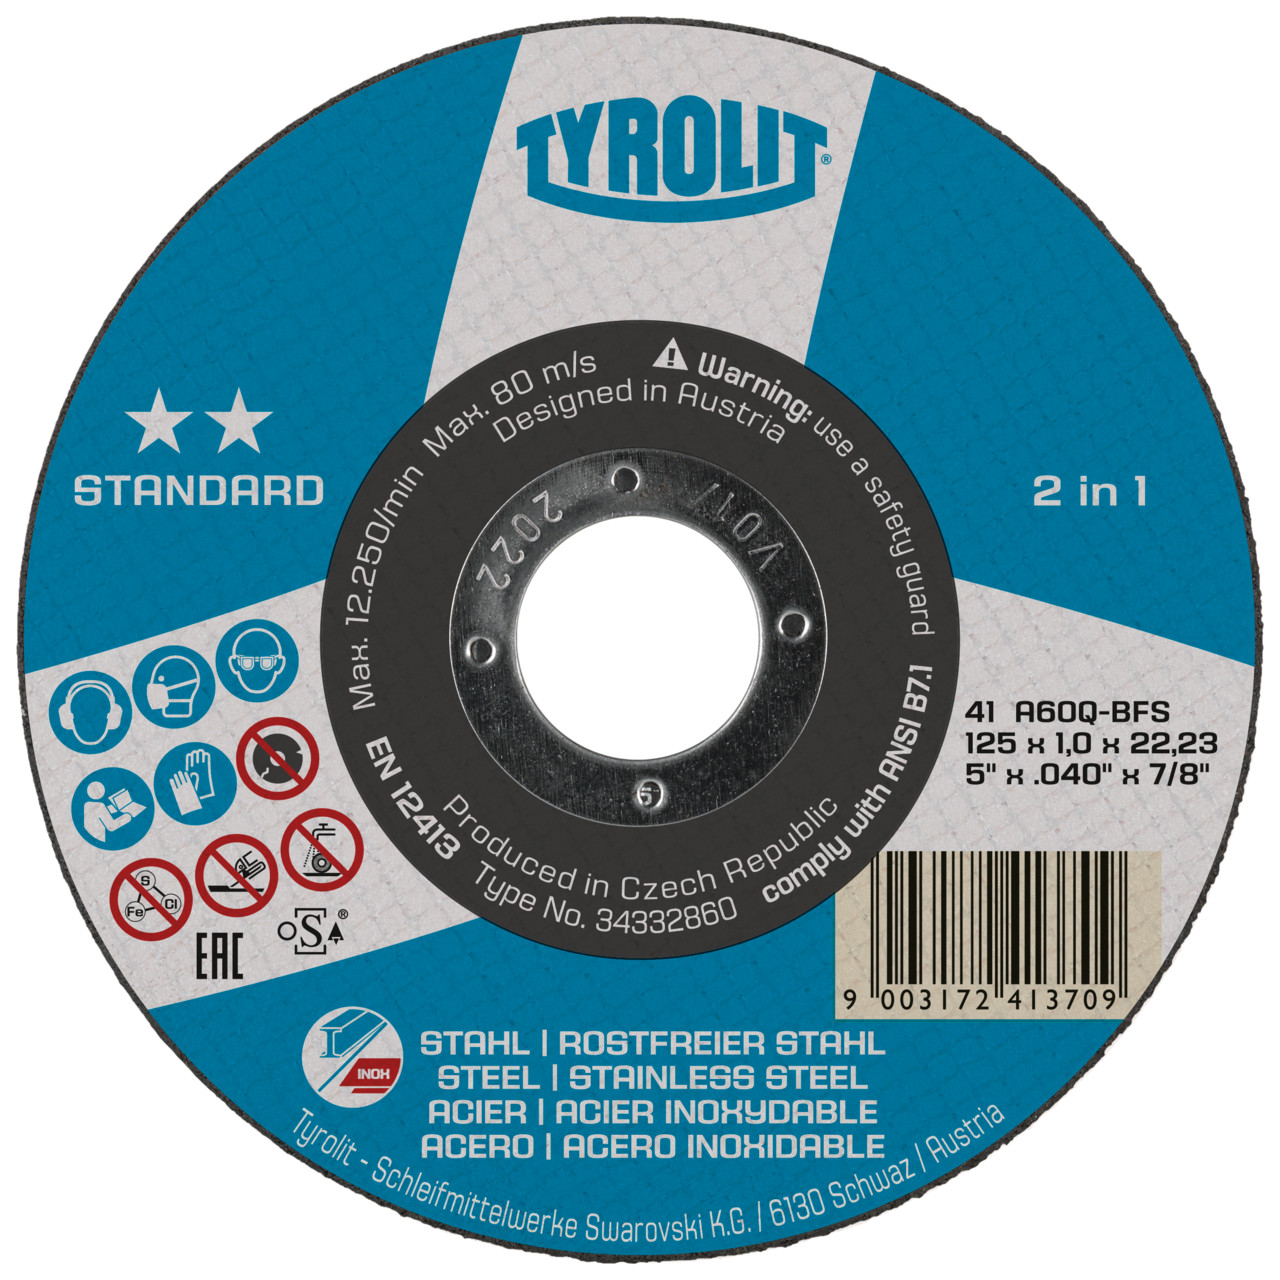 TYROLIT cut-off wheels DxDxH 115x1.0x22.23 2in1 for steel and stainless steel, shape: 41 - straight version, Art. 34332859